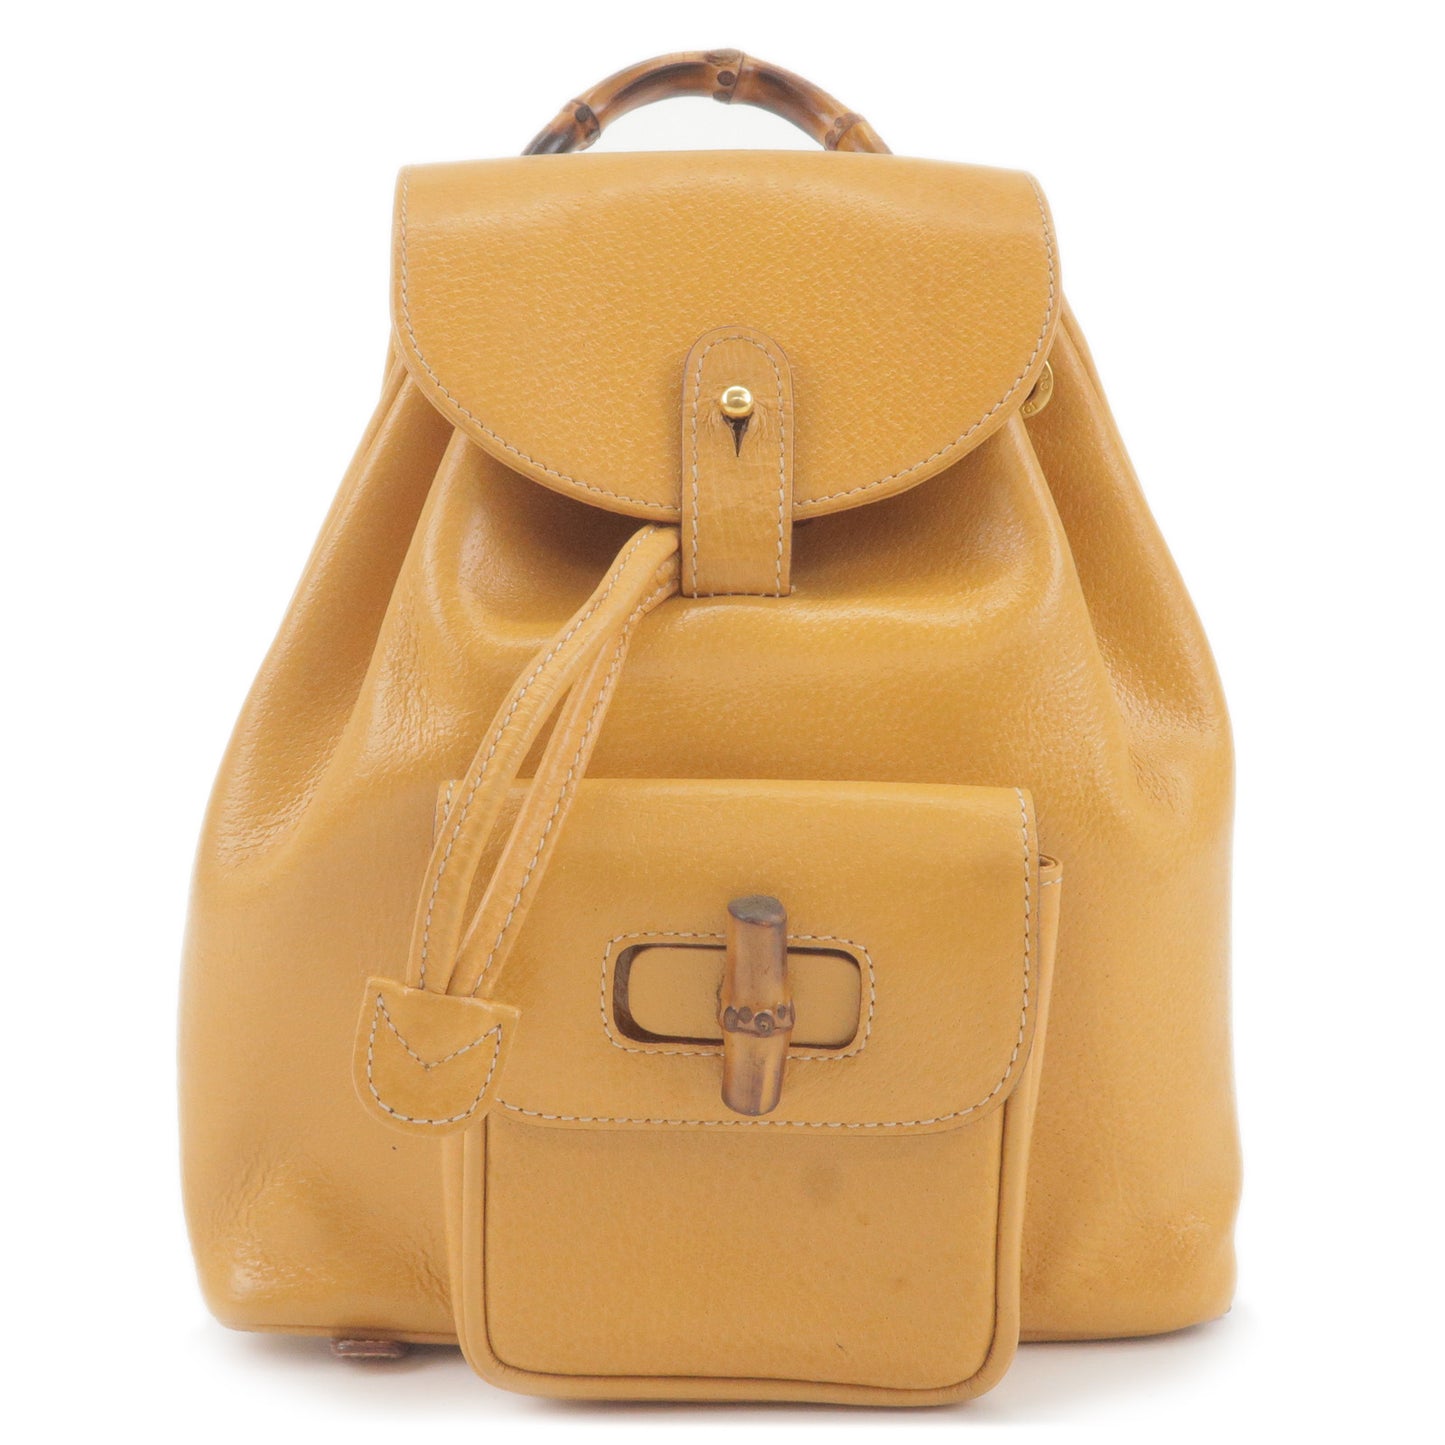 Bamboo-Leather-Ruck-Sack-Back-Pack-Yellow-Beige-03.2265.0030